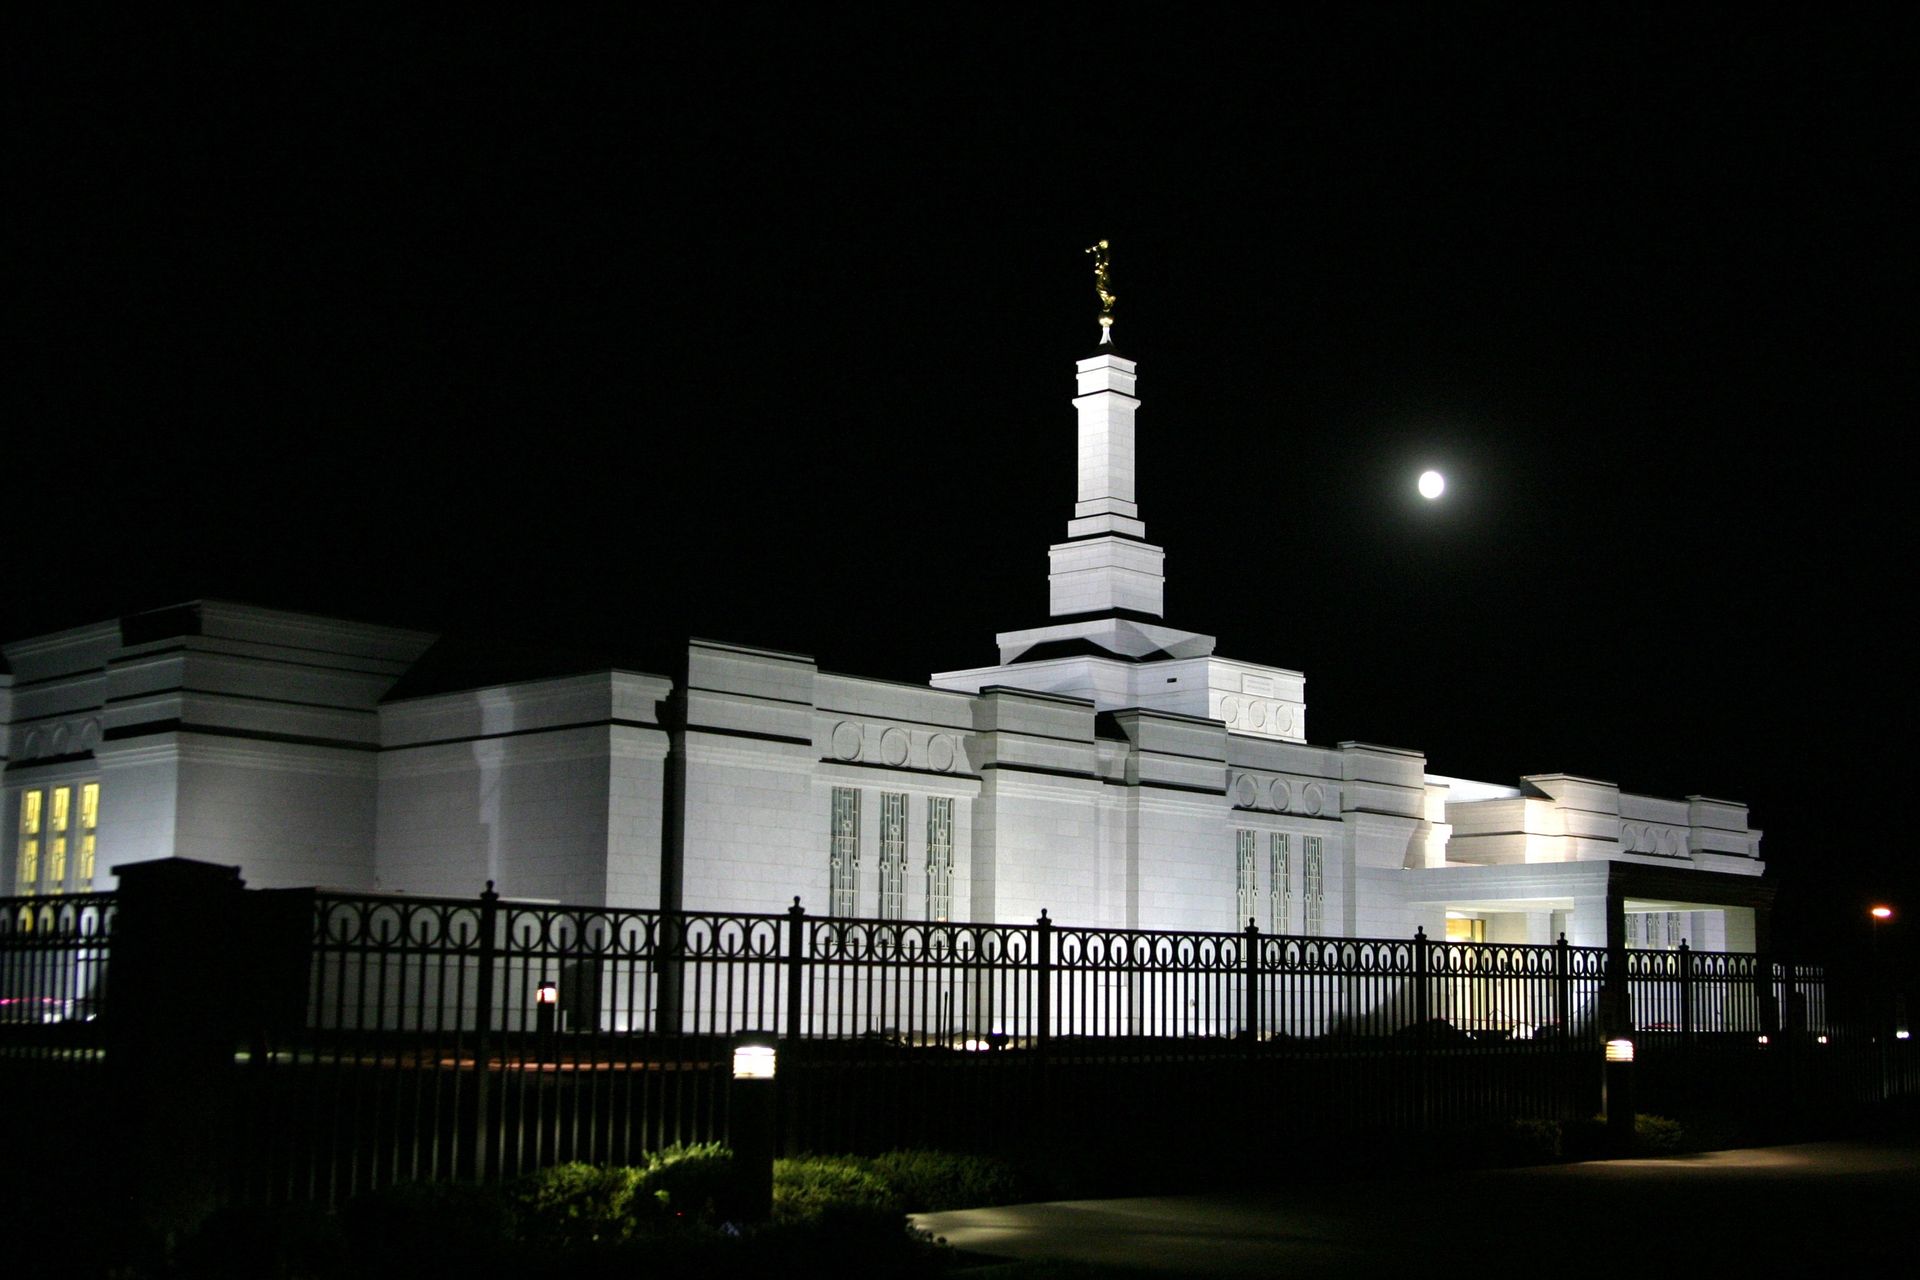 The Spokane Washington Temple in the evening, including the entrance and scenery.